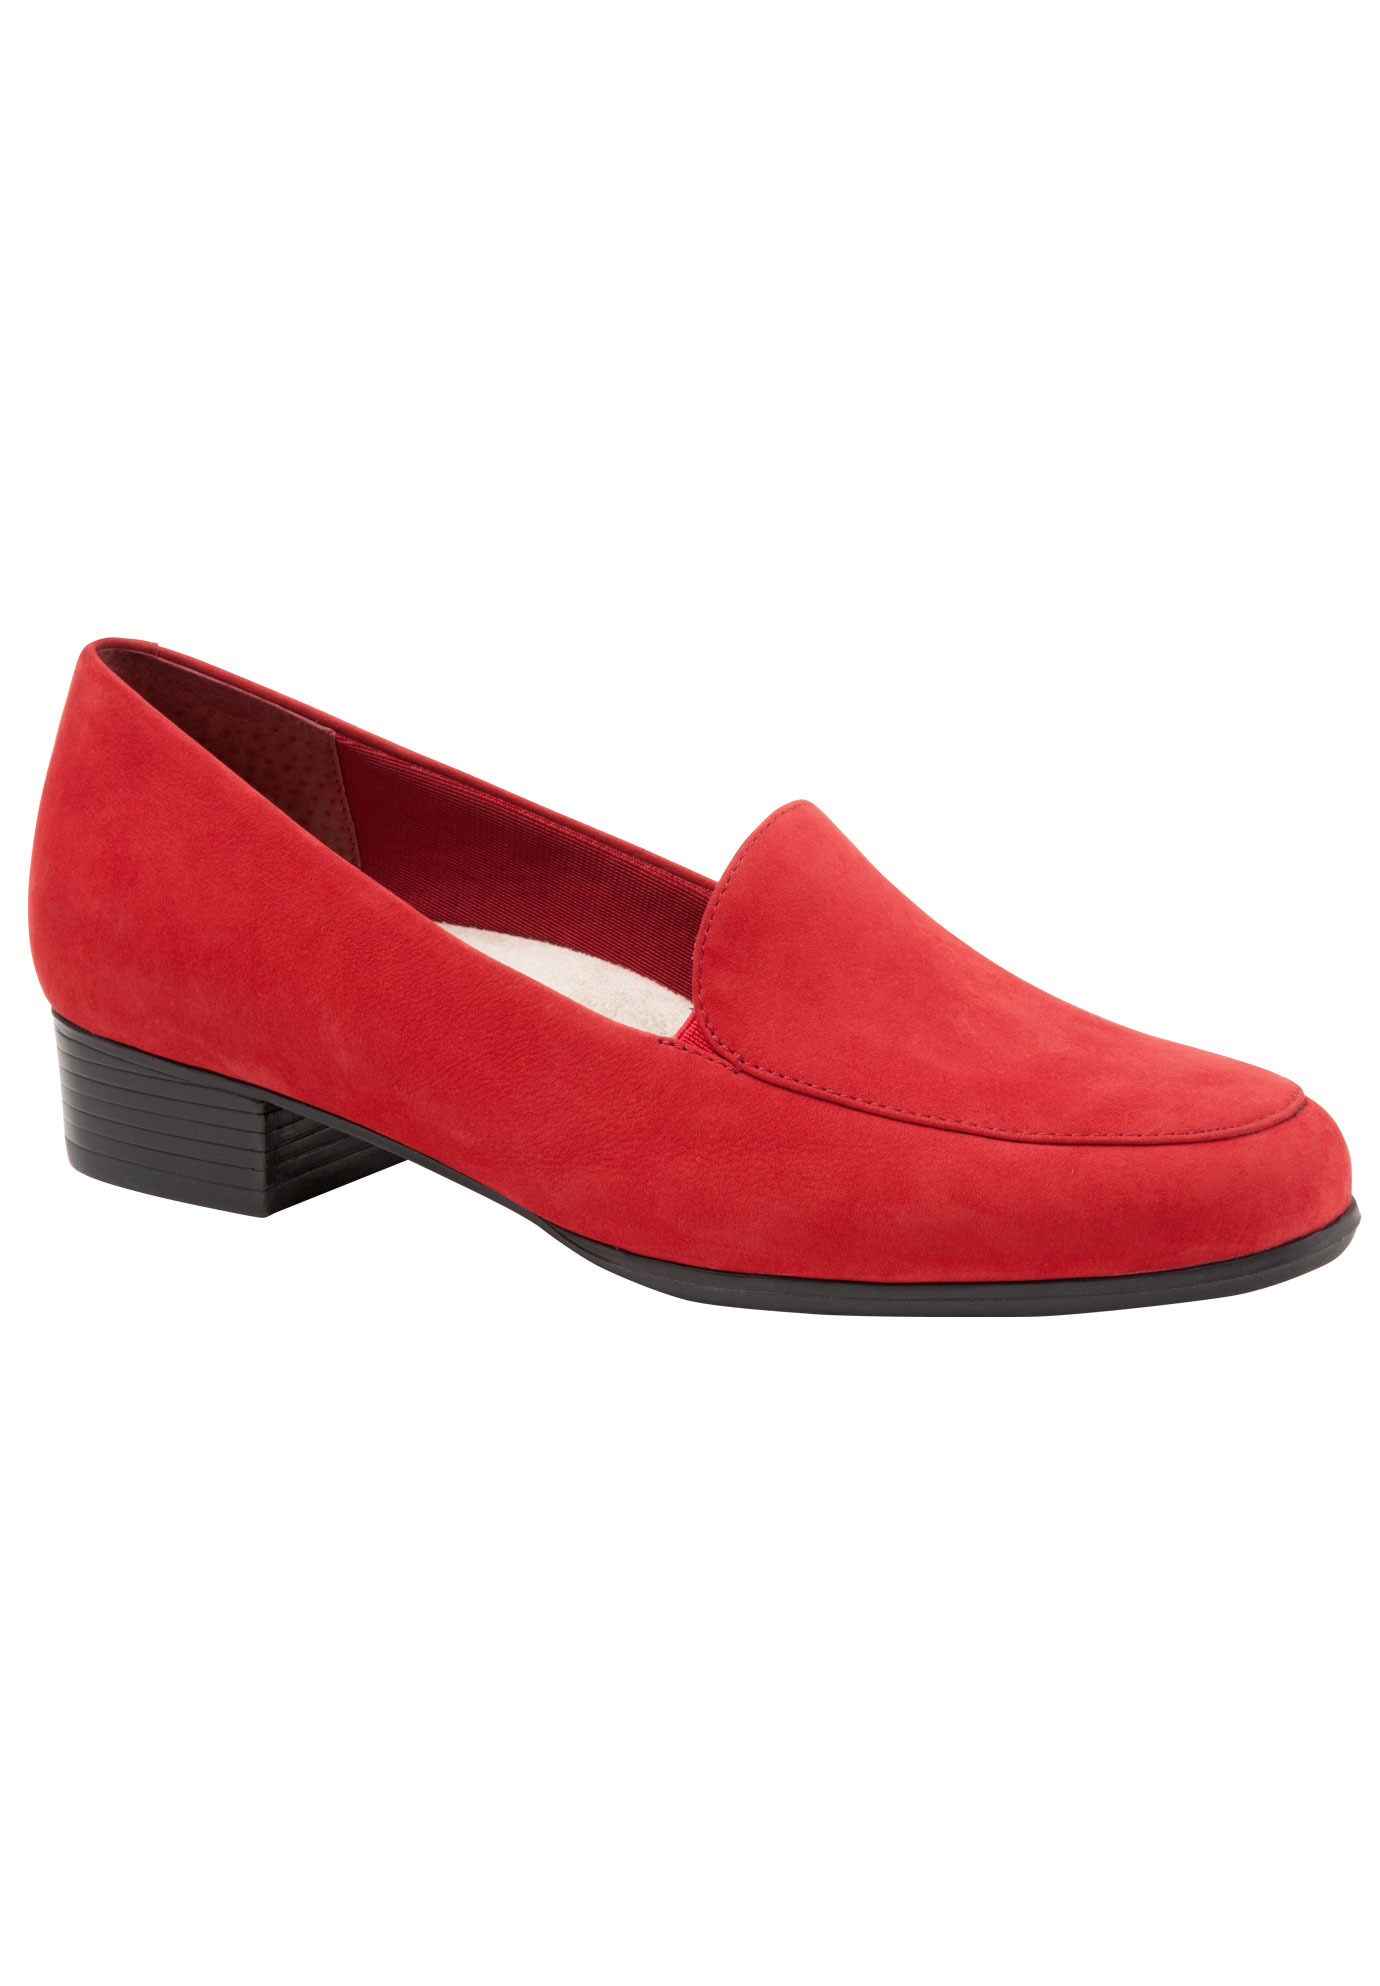 trotters red shoes